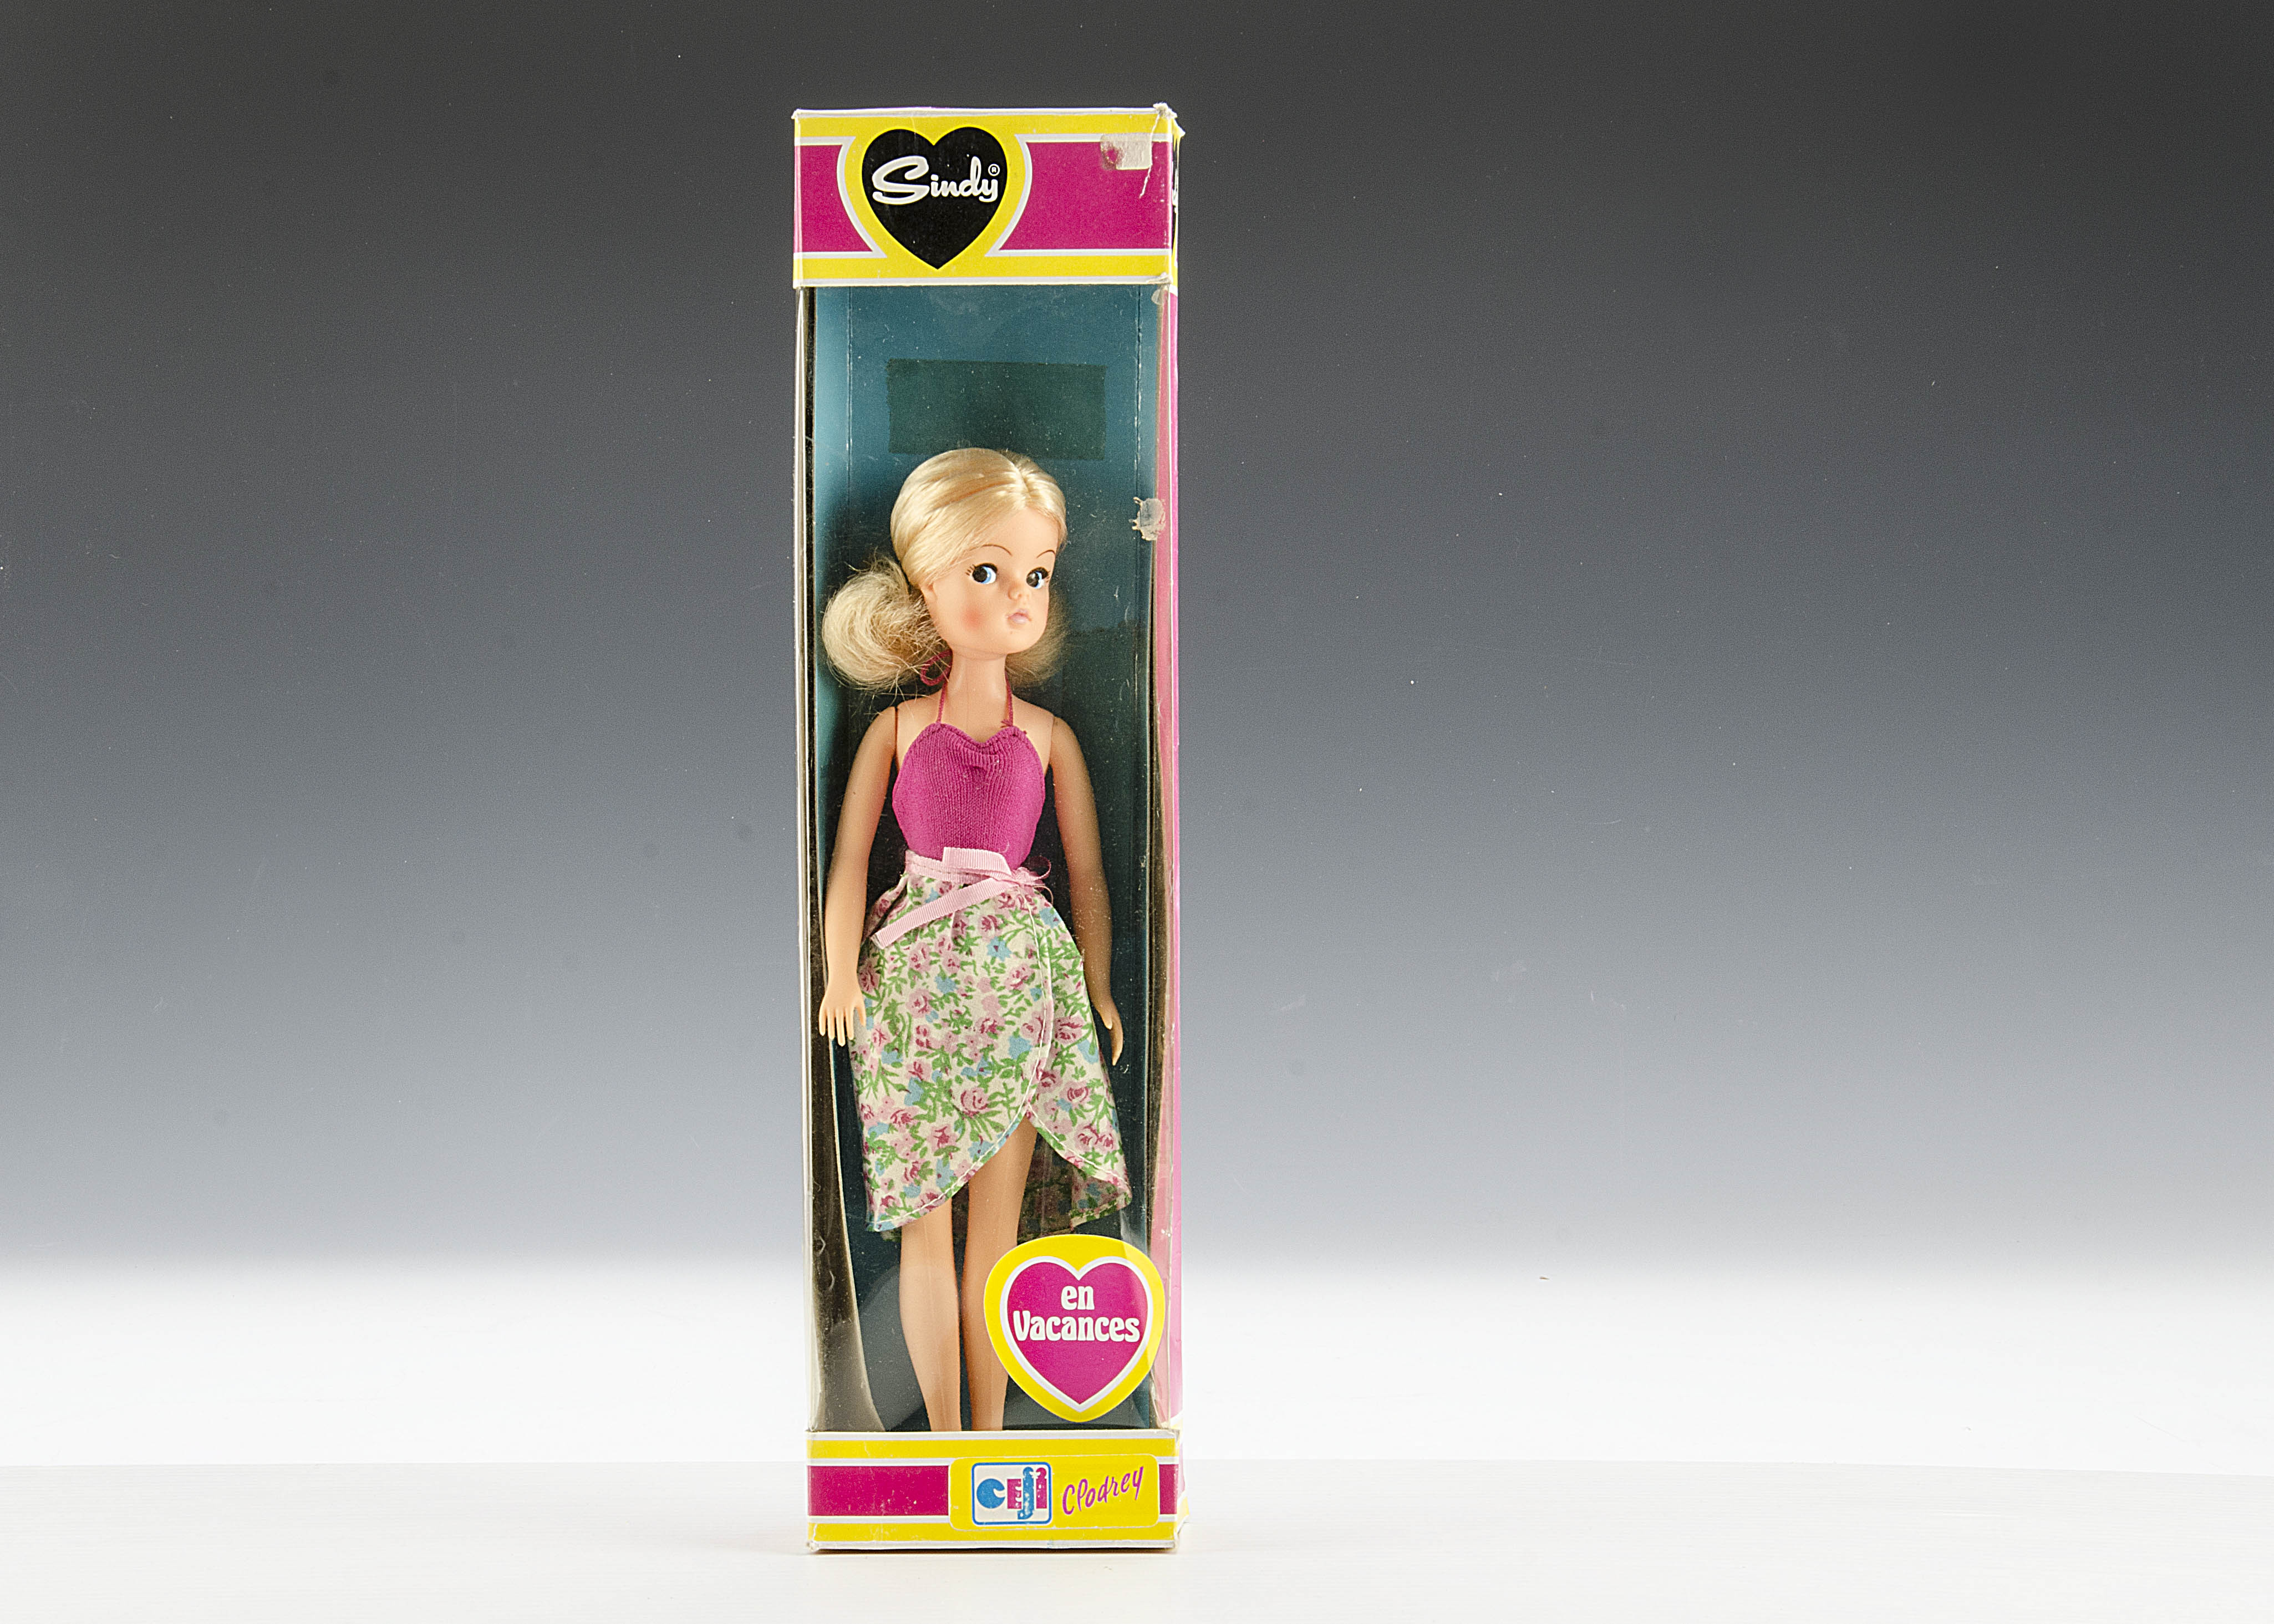 A Pedigree Sindy en Vacances, with blonde hair, pink swim suit and wrap-round floral skirt, in